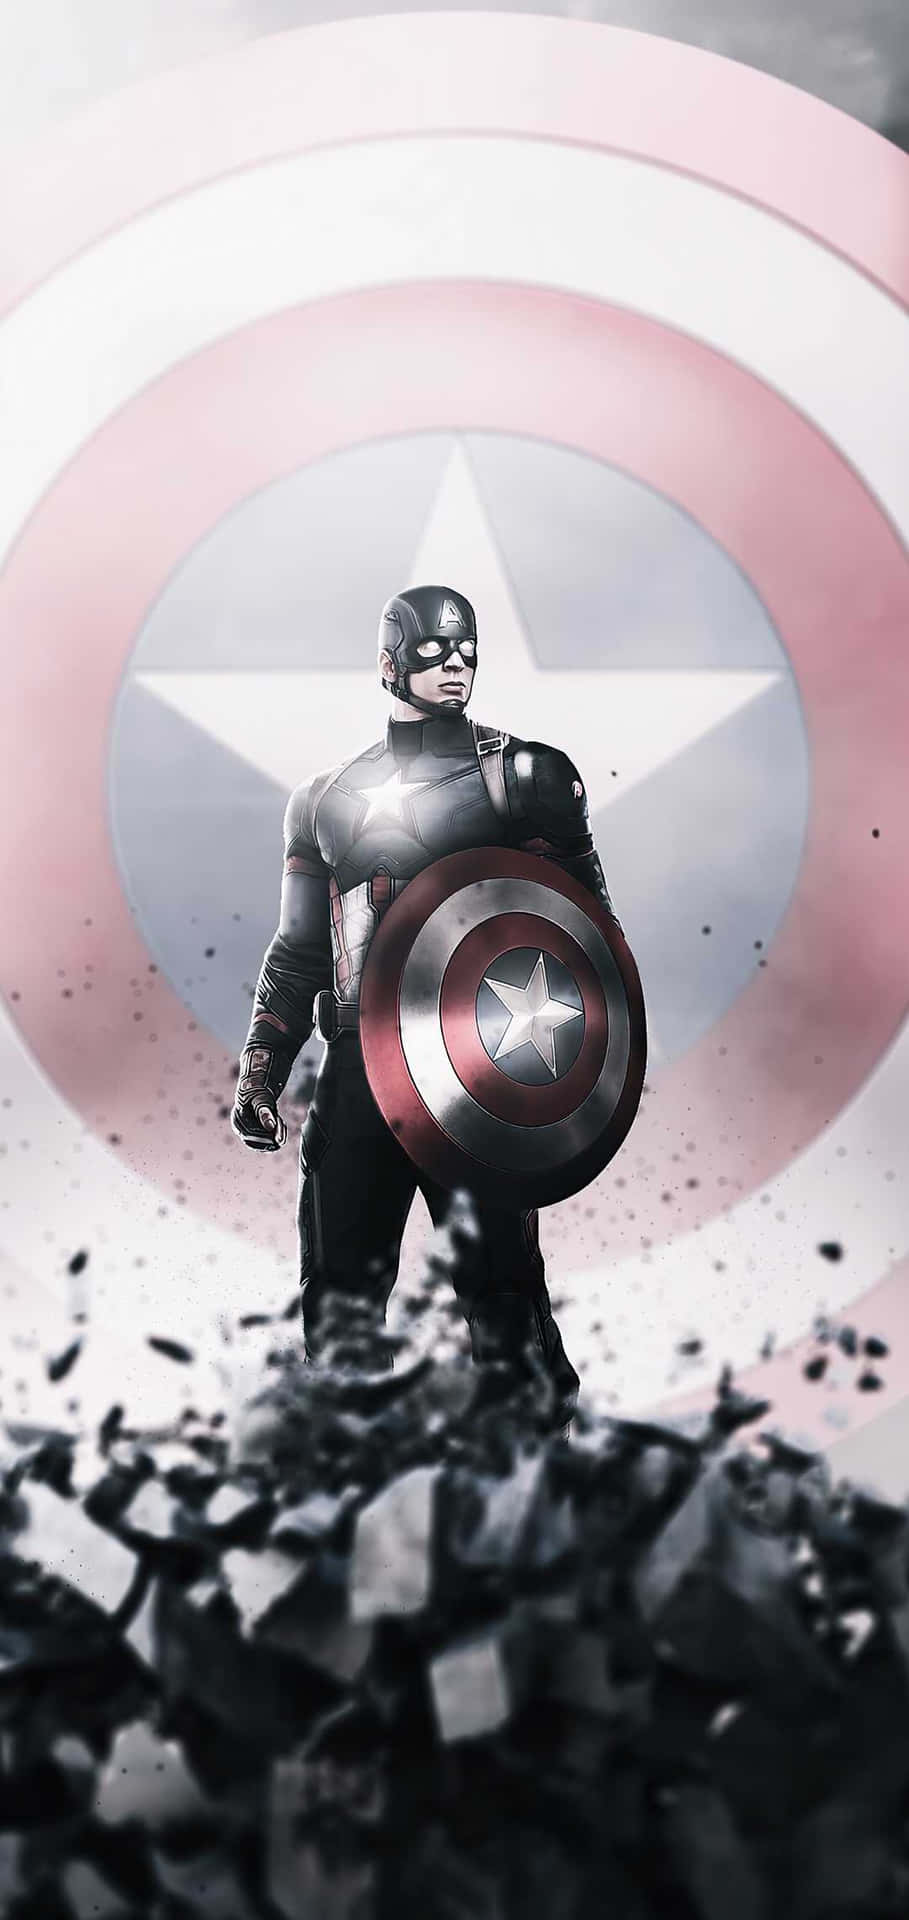 Android Captain America – Ready to Take On the World